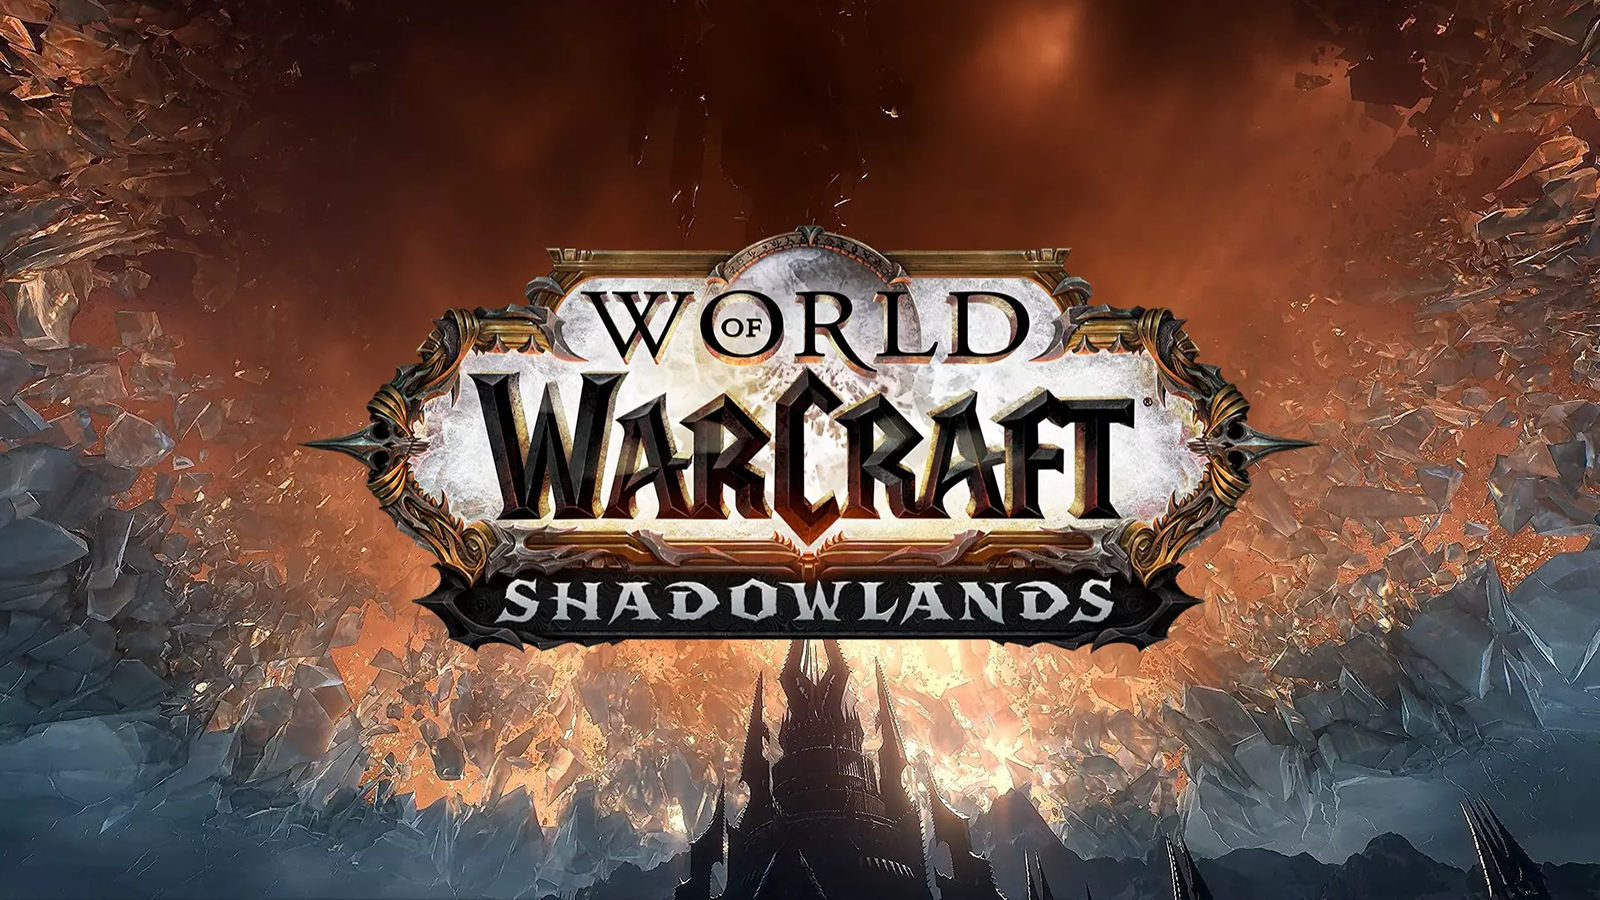 How to watch World of Warcraft: Shadowlands reveal event